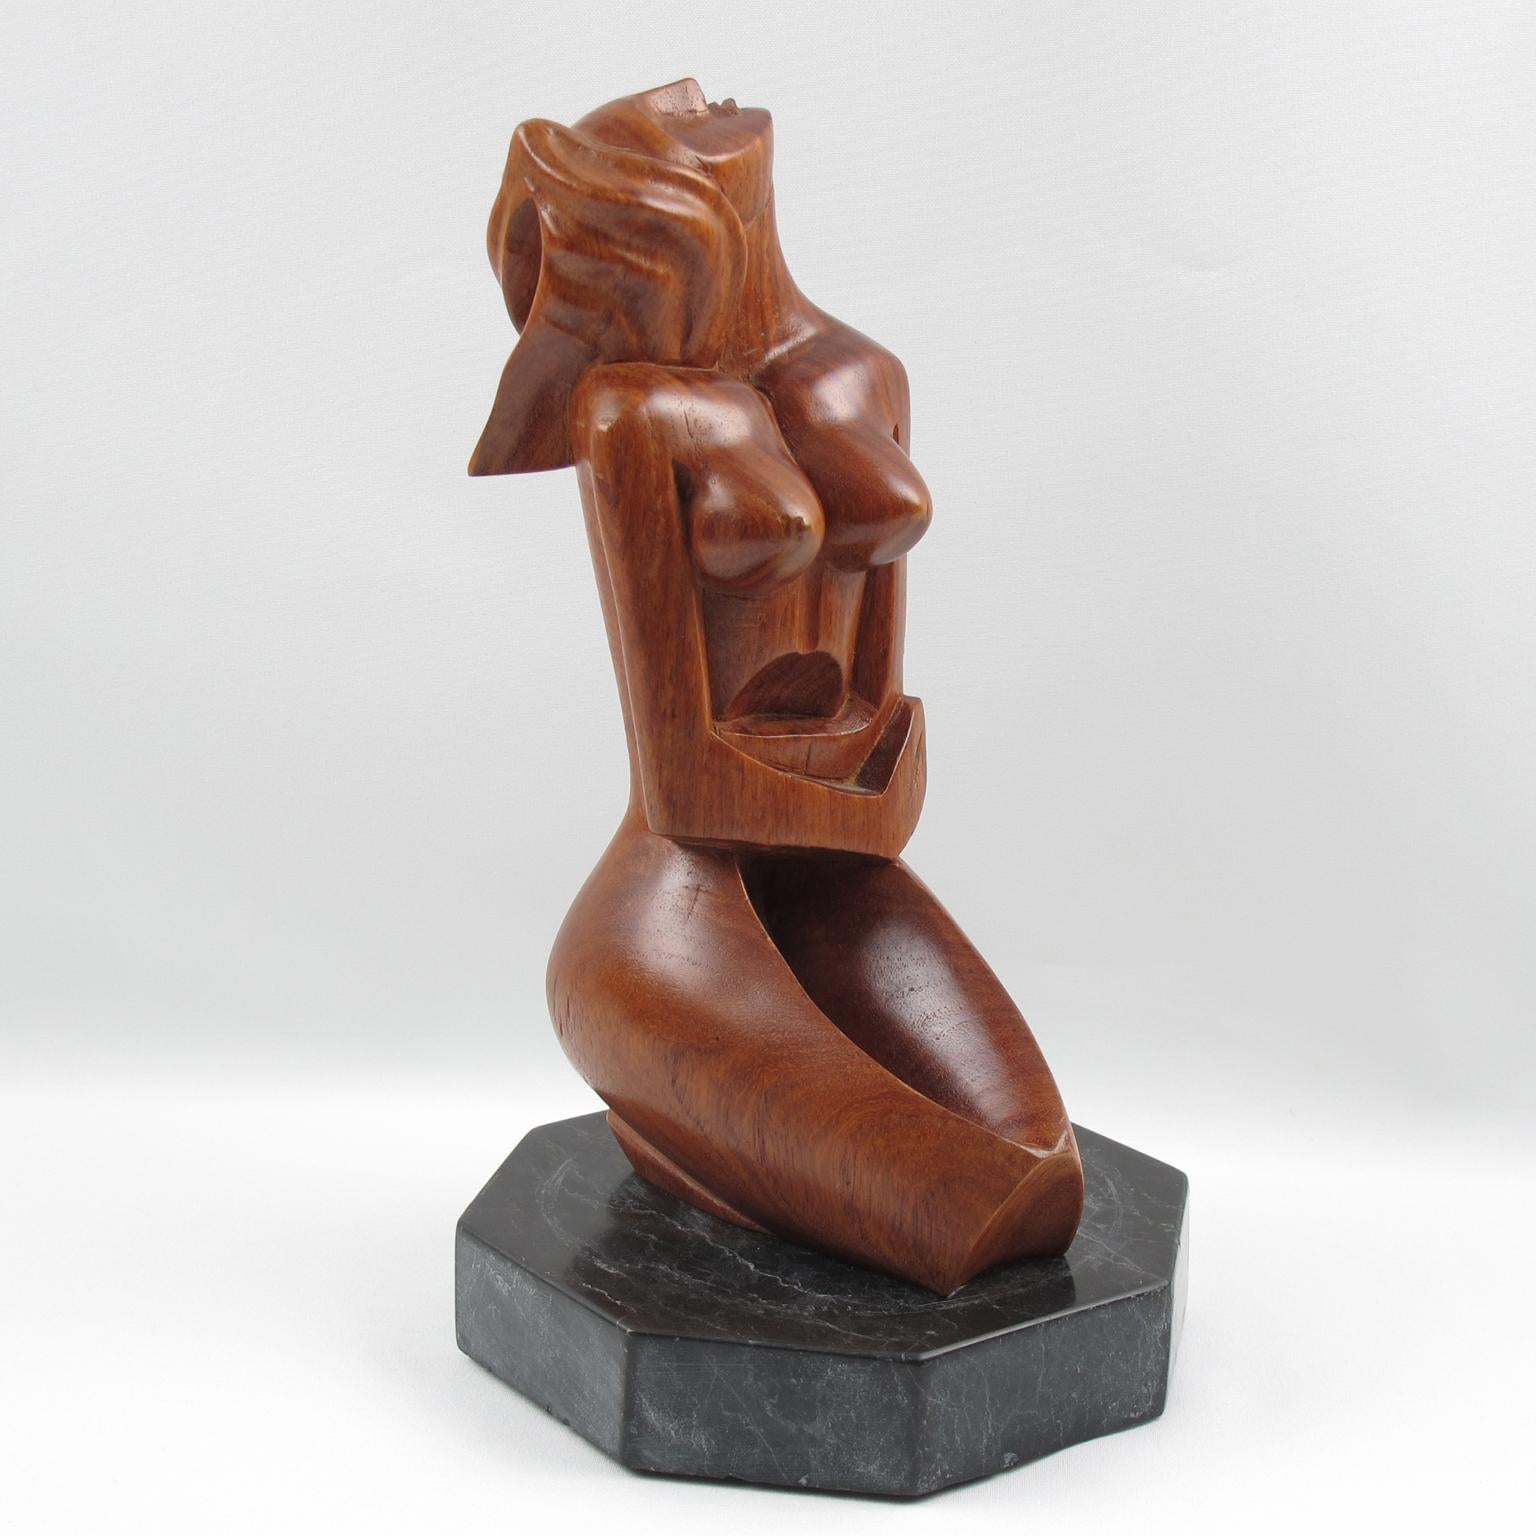 Cubist Nude Woman Wooden Sculpture on Marble Base - Brown Nude Sculpture by Unknown